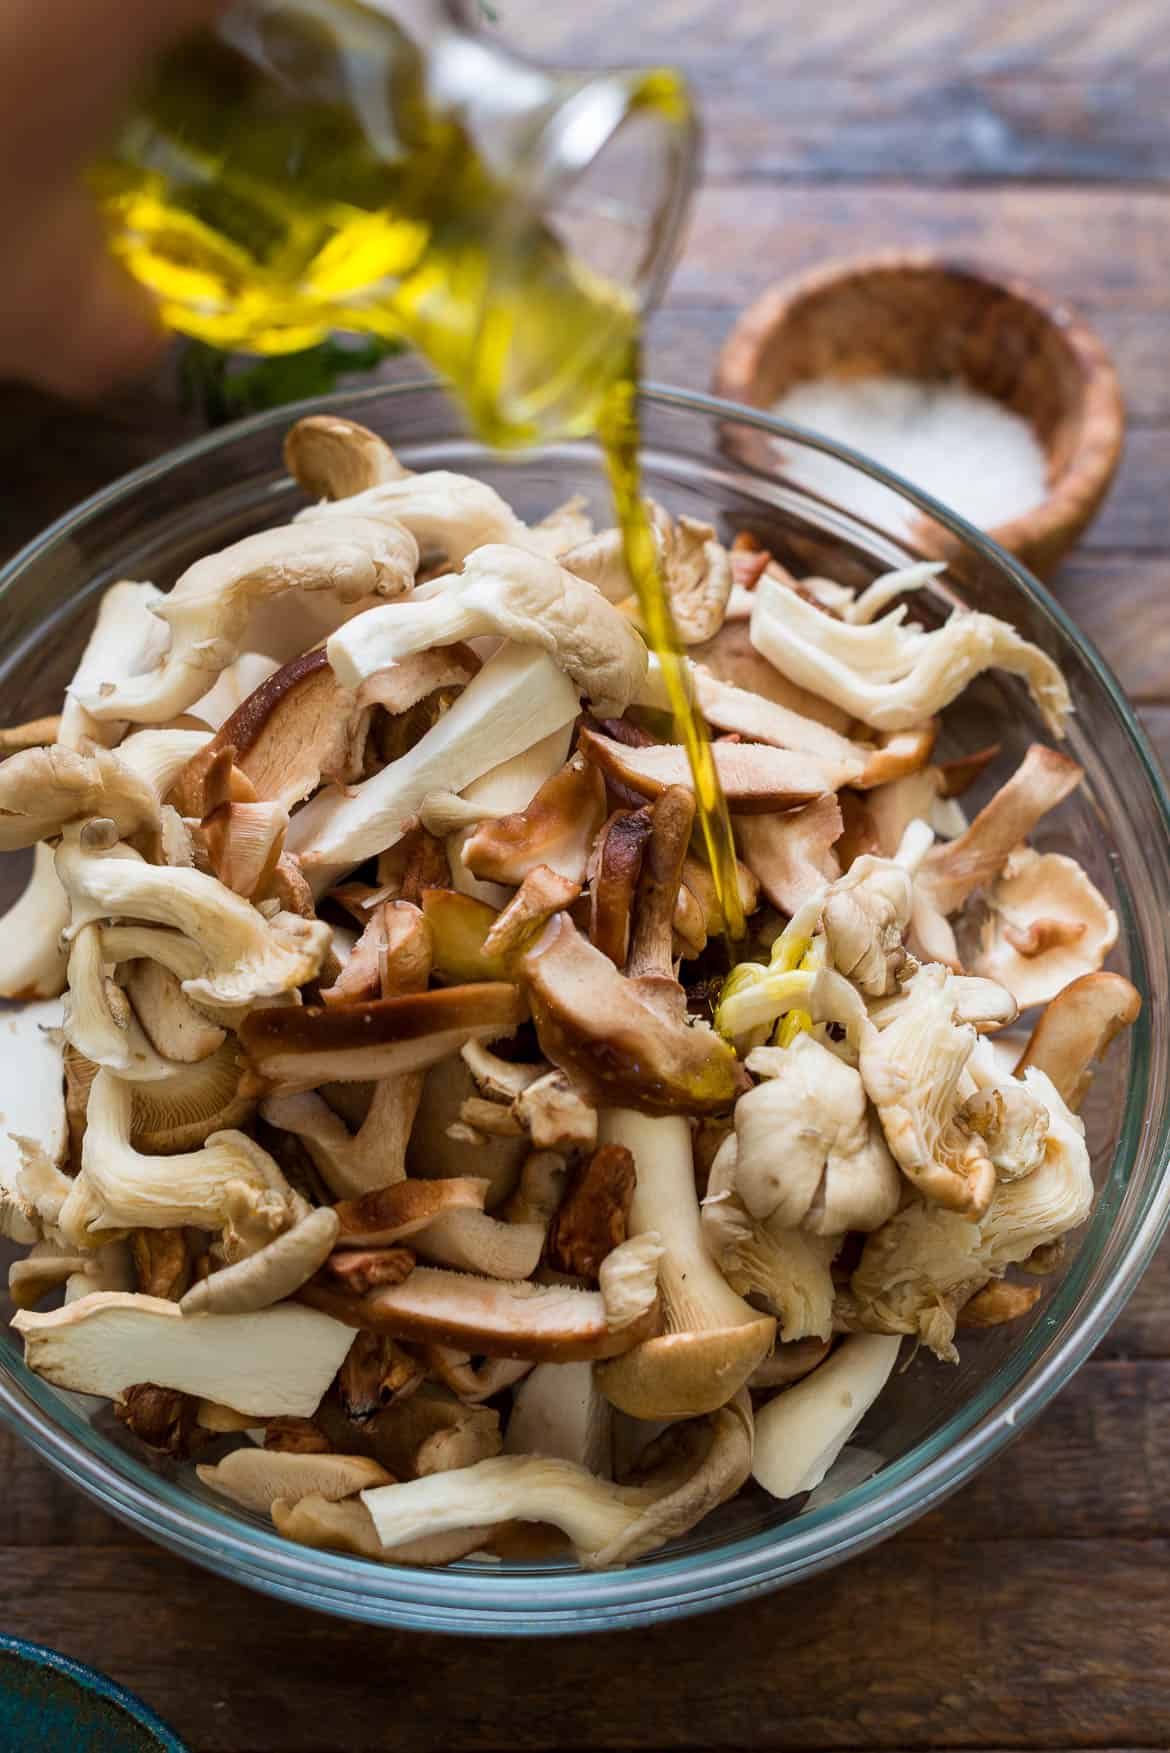 Drizzling olive oil over mushrooms in a glass bowl.